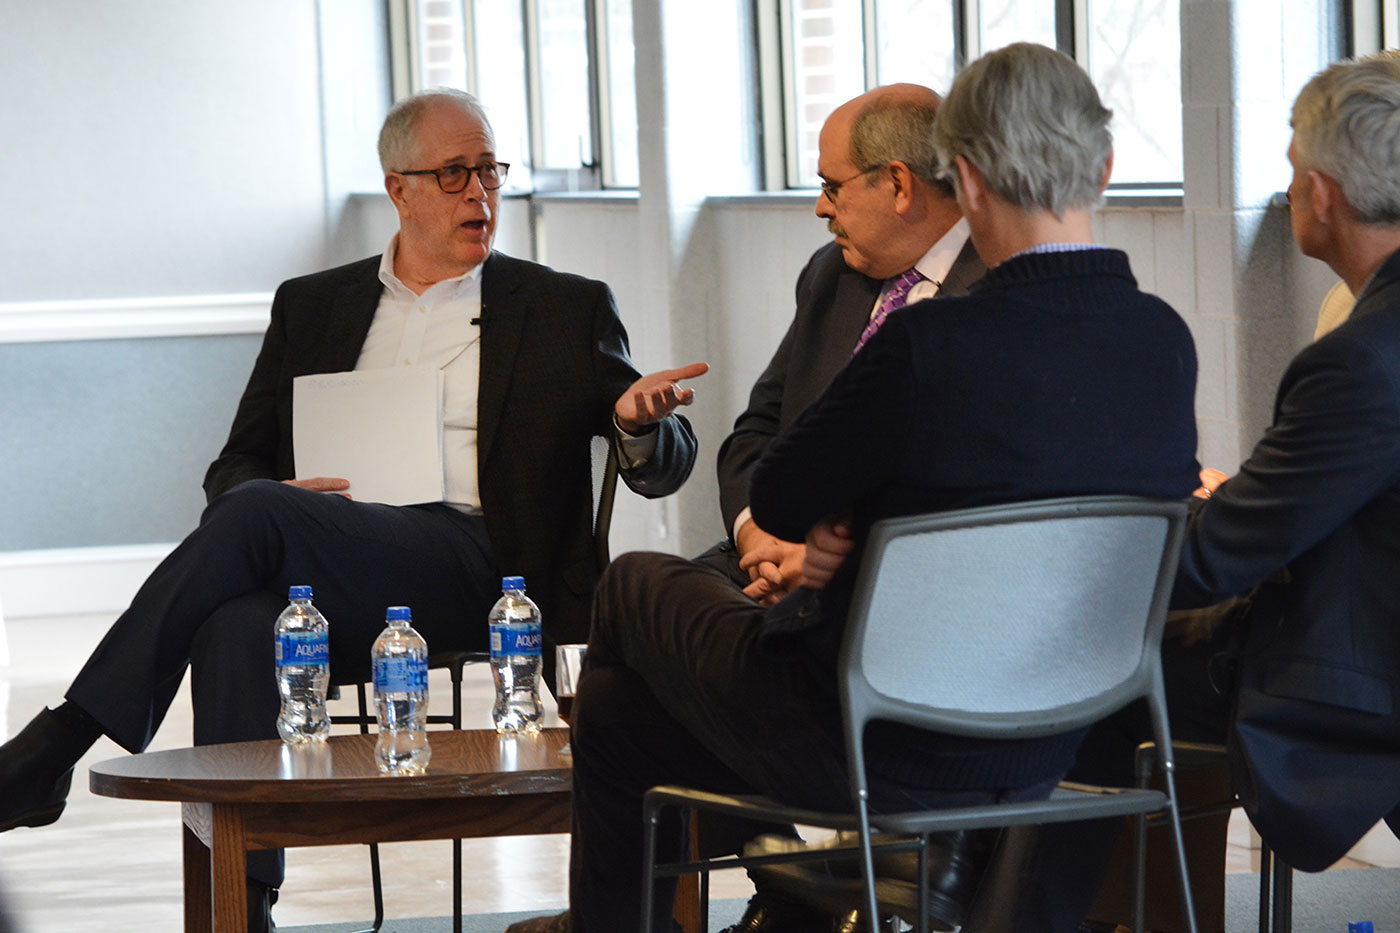 Kevin Harter, professor of practice of entrepreneurship and the director of the Center for Medical Innovation at Penn State College of Medicine, left, takes part in a discussion following Steven Johnson's talk at Penn State Harrisburg in March. Harter is pictured at left in a group of four seated people in business attire. The four are engaged in conversation in a large meeting space.